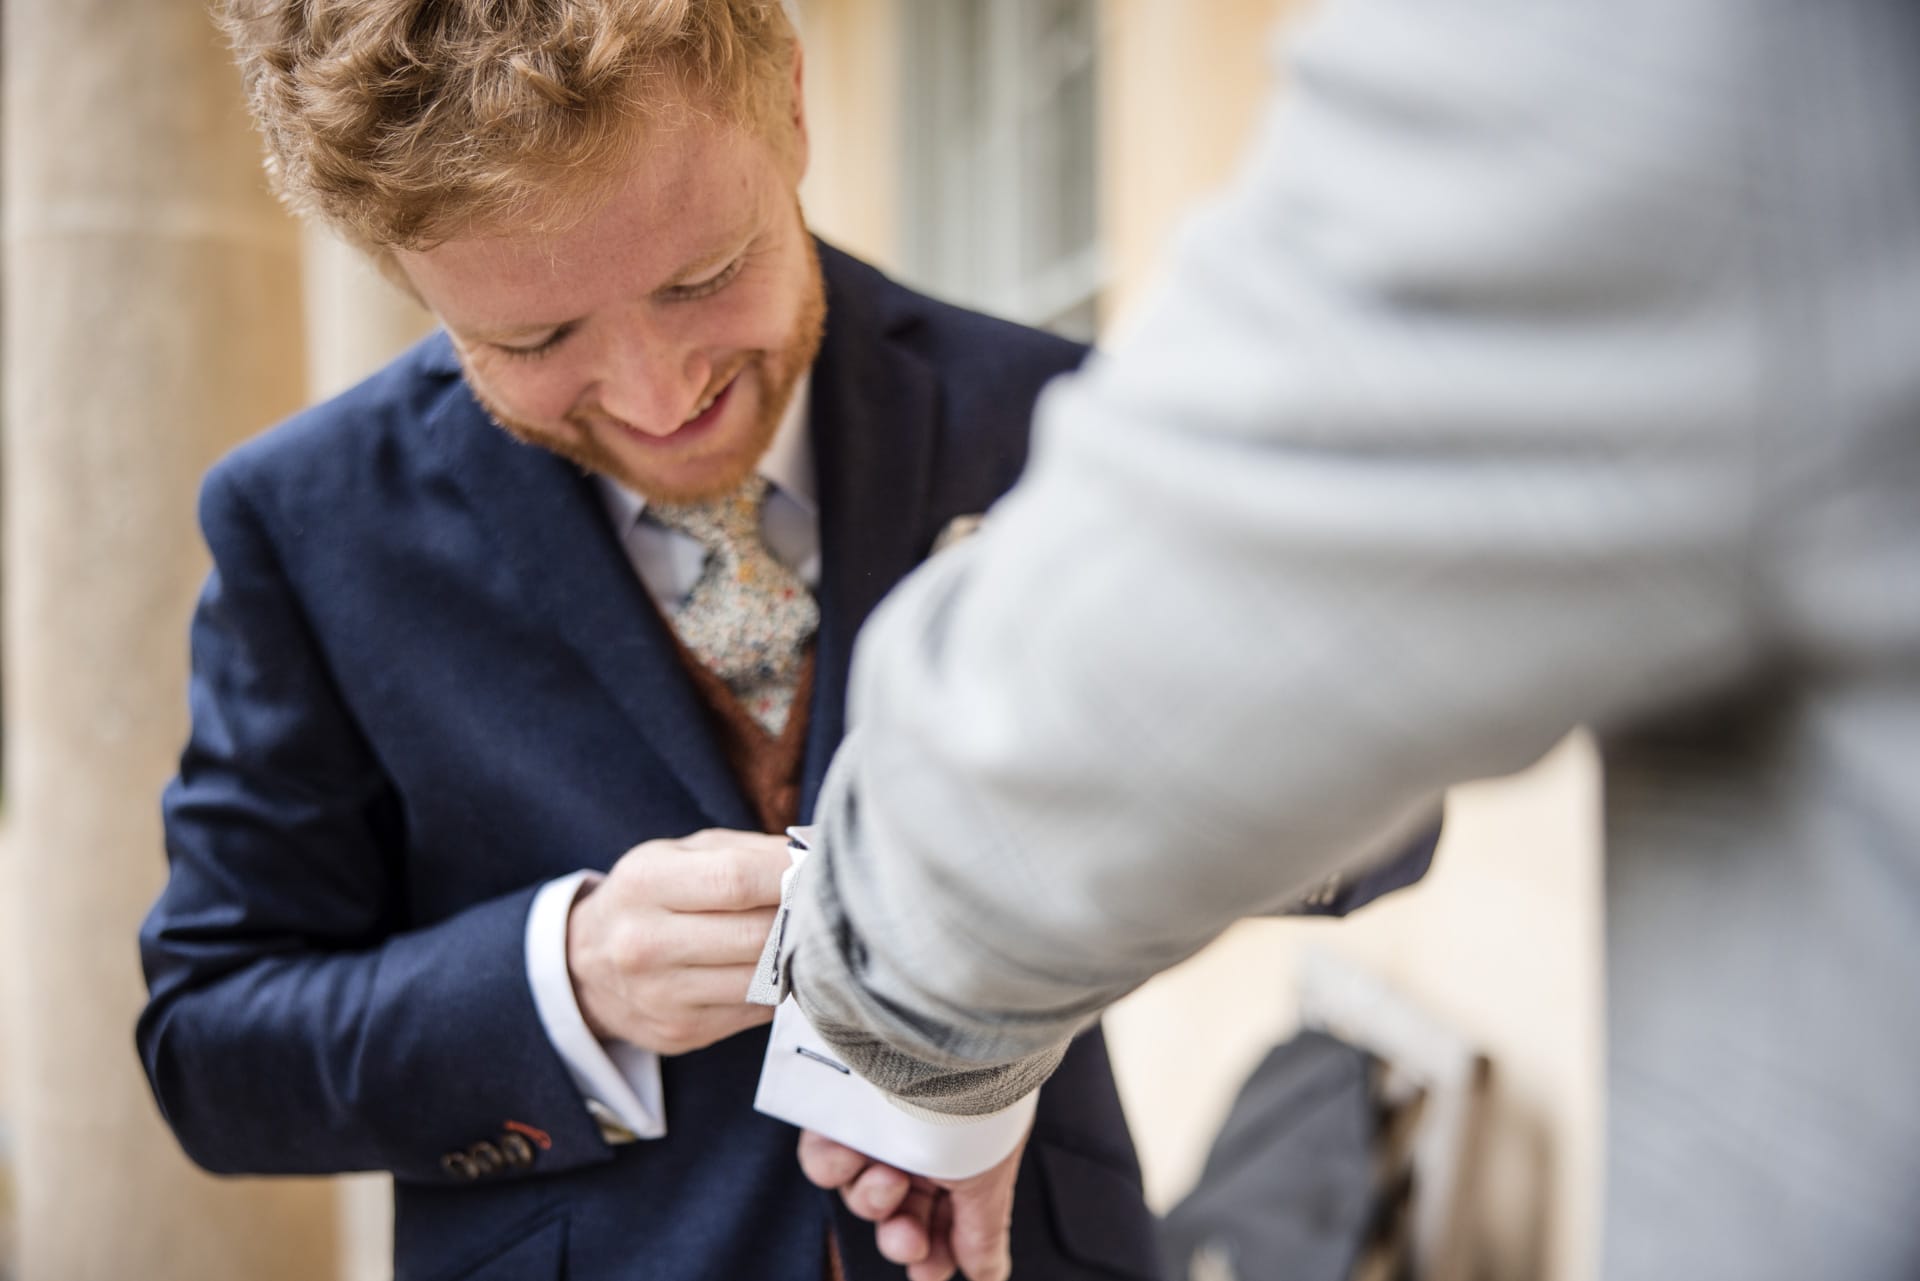 Groom helping family guest get ready for wedding day